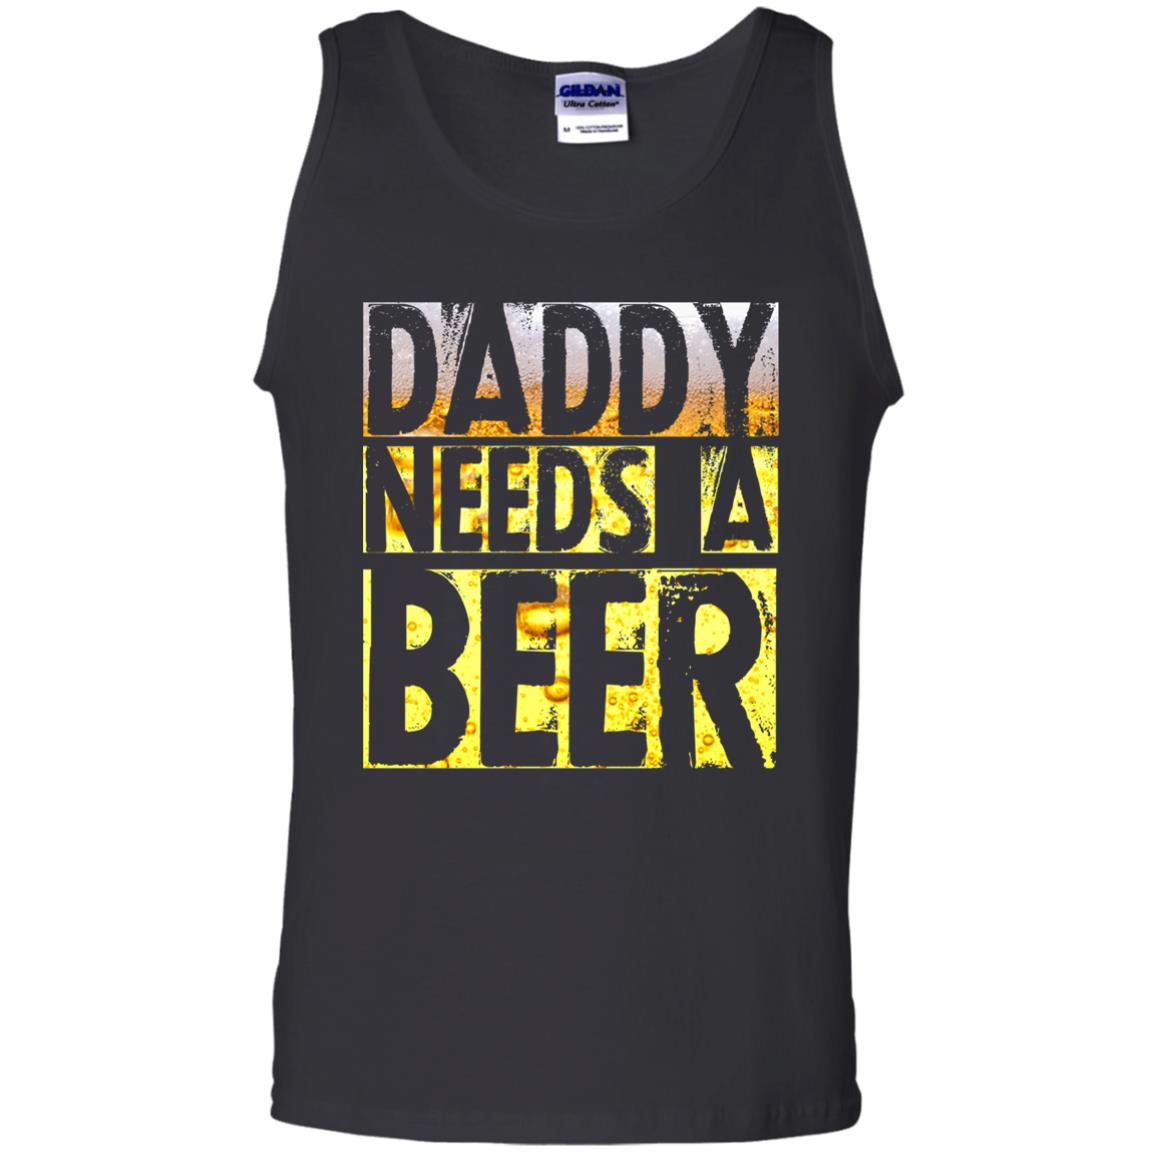 Daddy Needs A Beer Shirt For Dad Loves BeerG220 Gildan 100% Cotton Tank Top